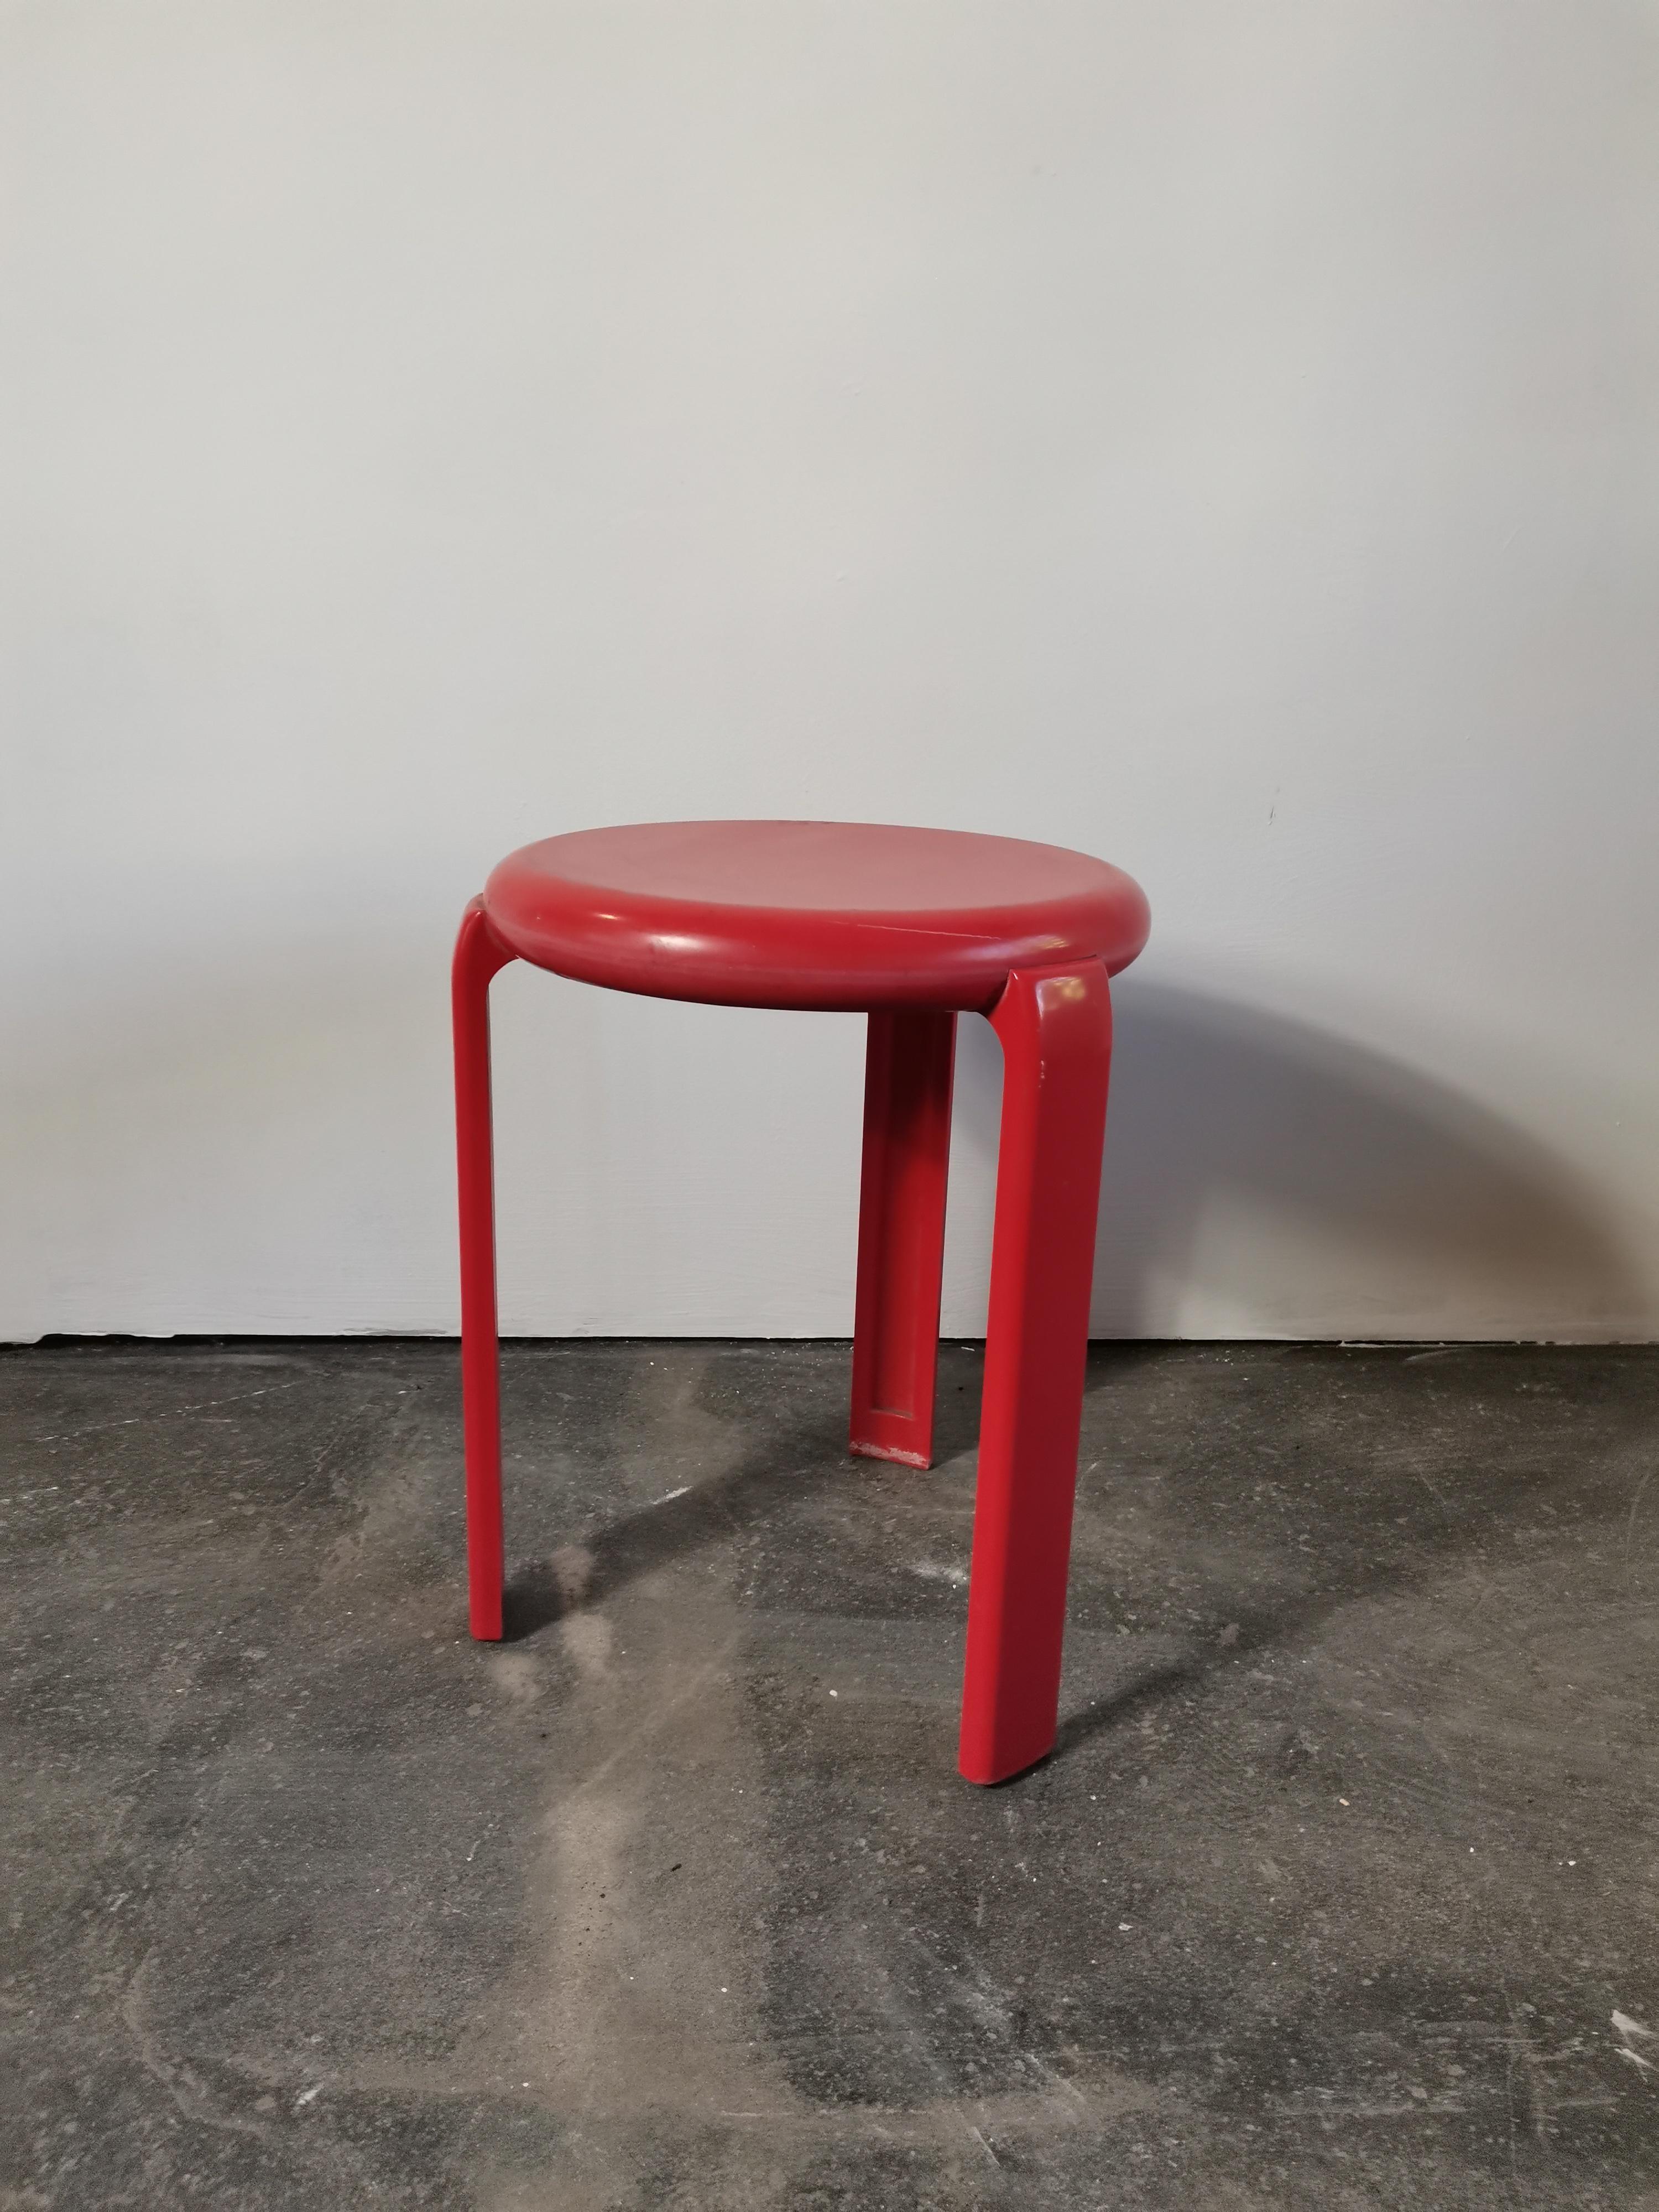 Red STOOL 1970s

Produced by LUCHESSE METALPLASTICA (labeled).

Material: Plastic and metal.

Three-legged stool is from durable plastic vibrant red colour that will instantly boost any room.

Stool is sized as decorative piece or functional seat.